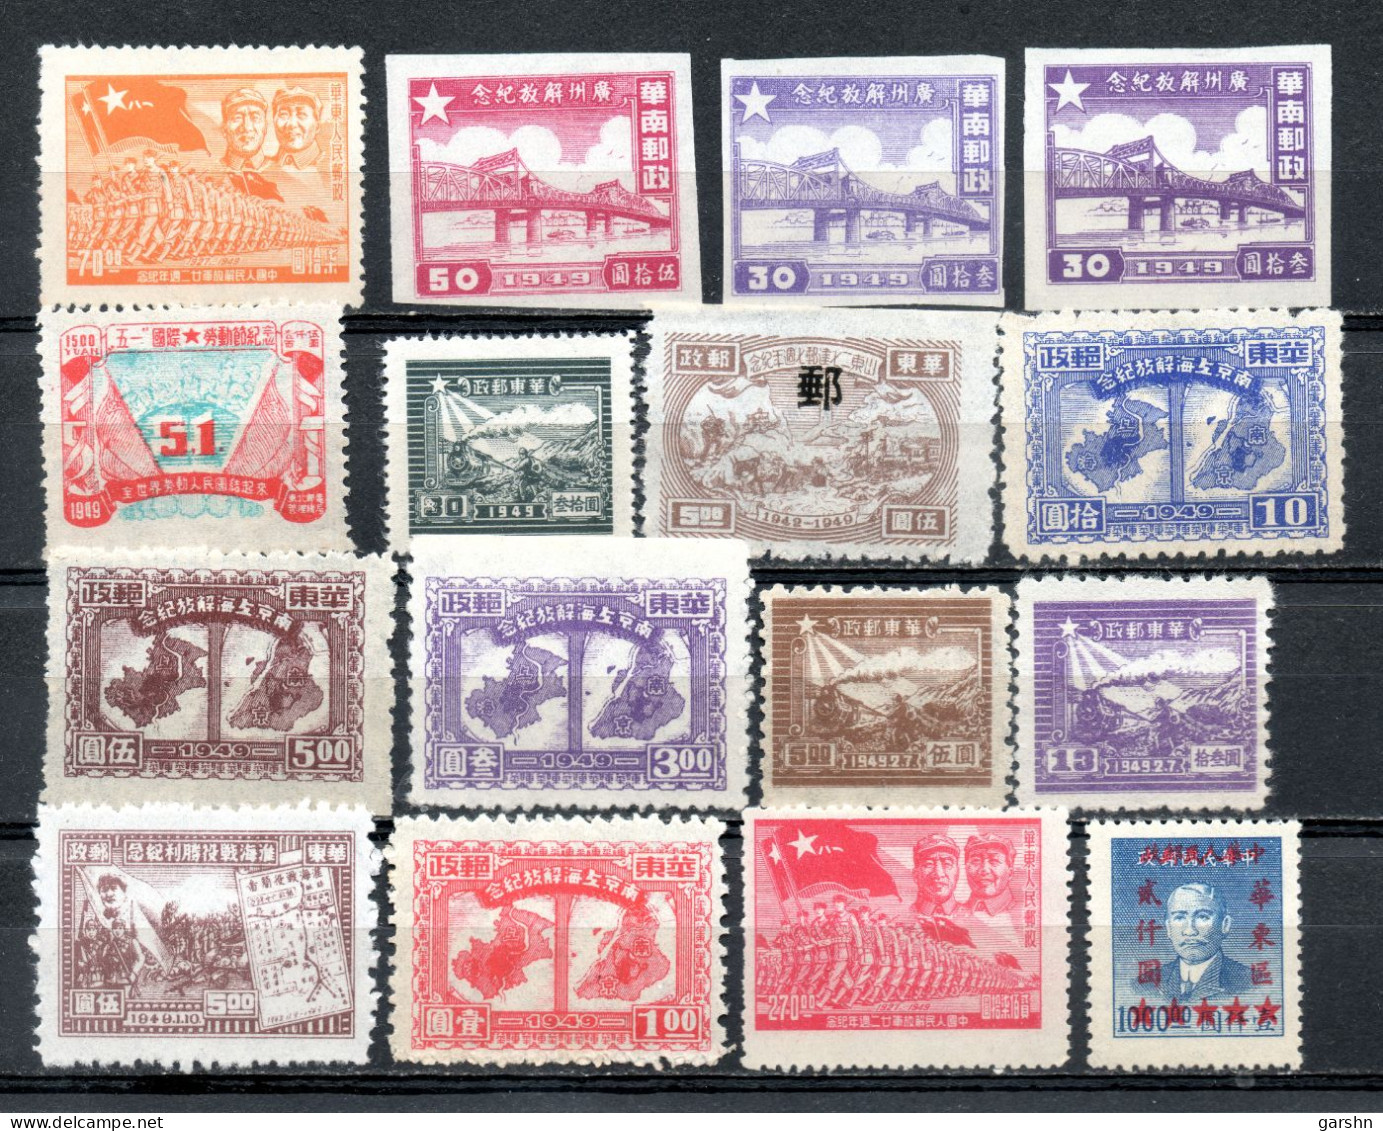 China Chine : (1 )  Lot De Timbres Chine Communiste - Oost-China 1949-50